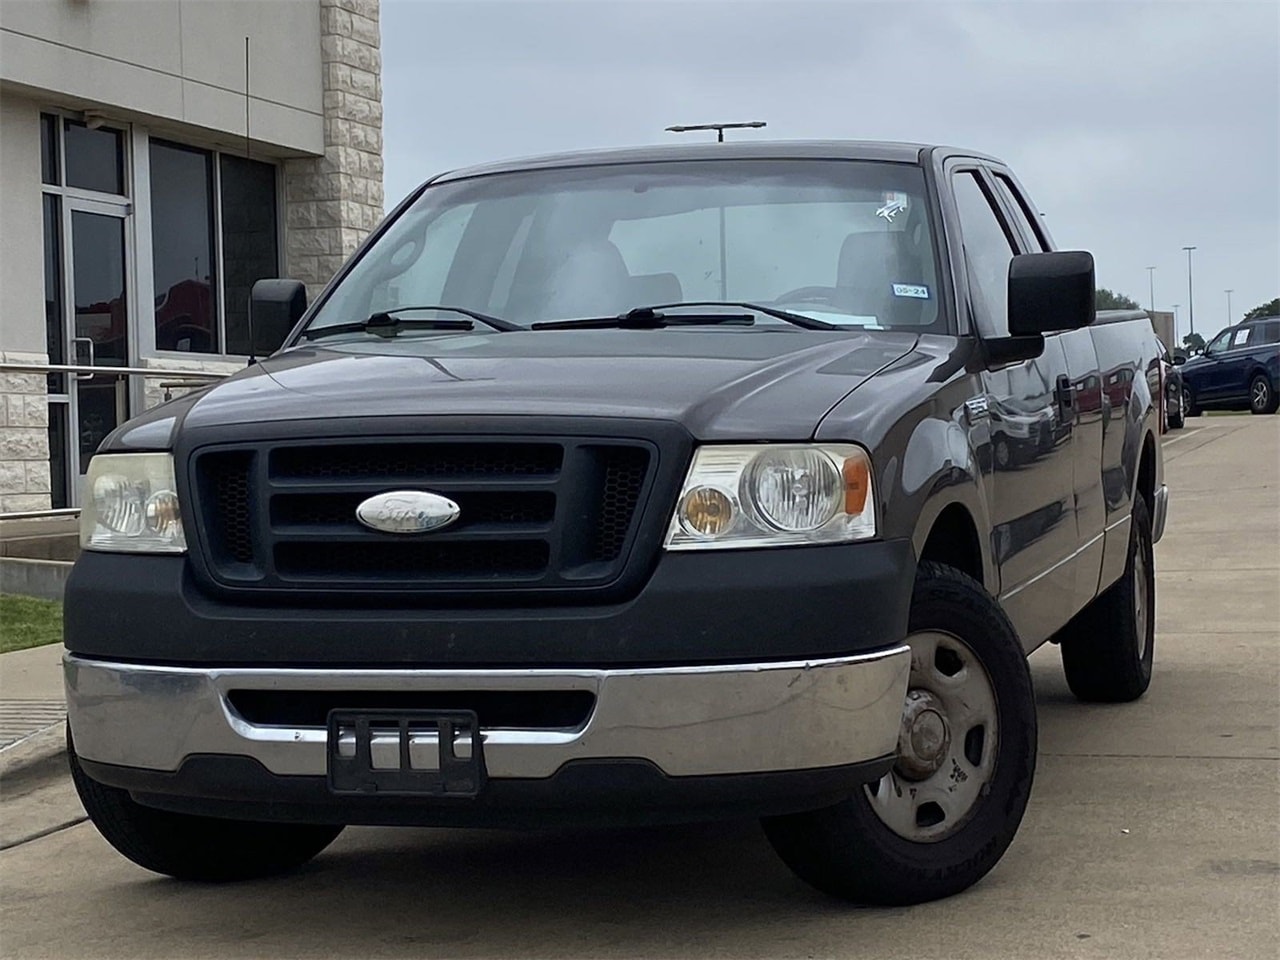 Used 2008 Ford F-150 XL with VIN 1FTRX12W38KD11965 for sale in Mesquite, TX